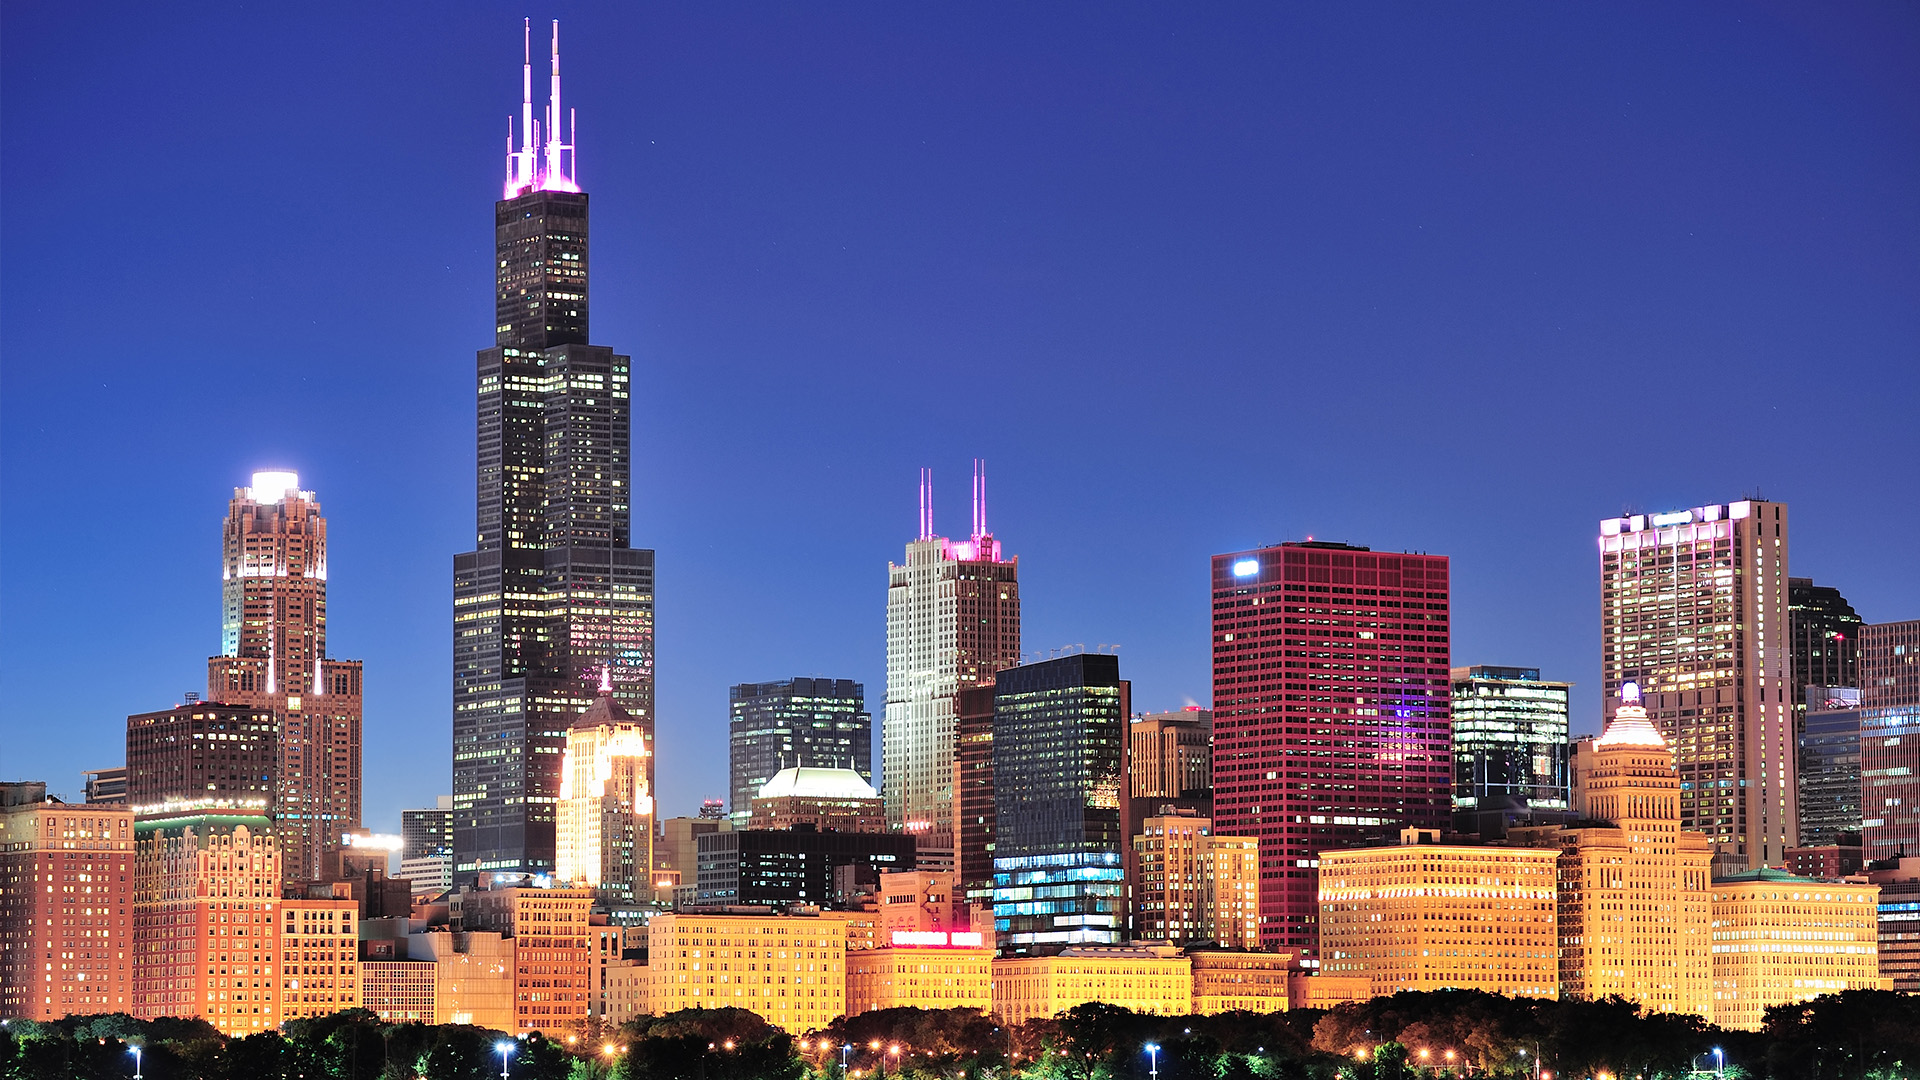 Willis tower and other buildings in skyline lit up at night